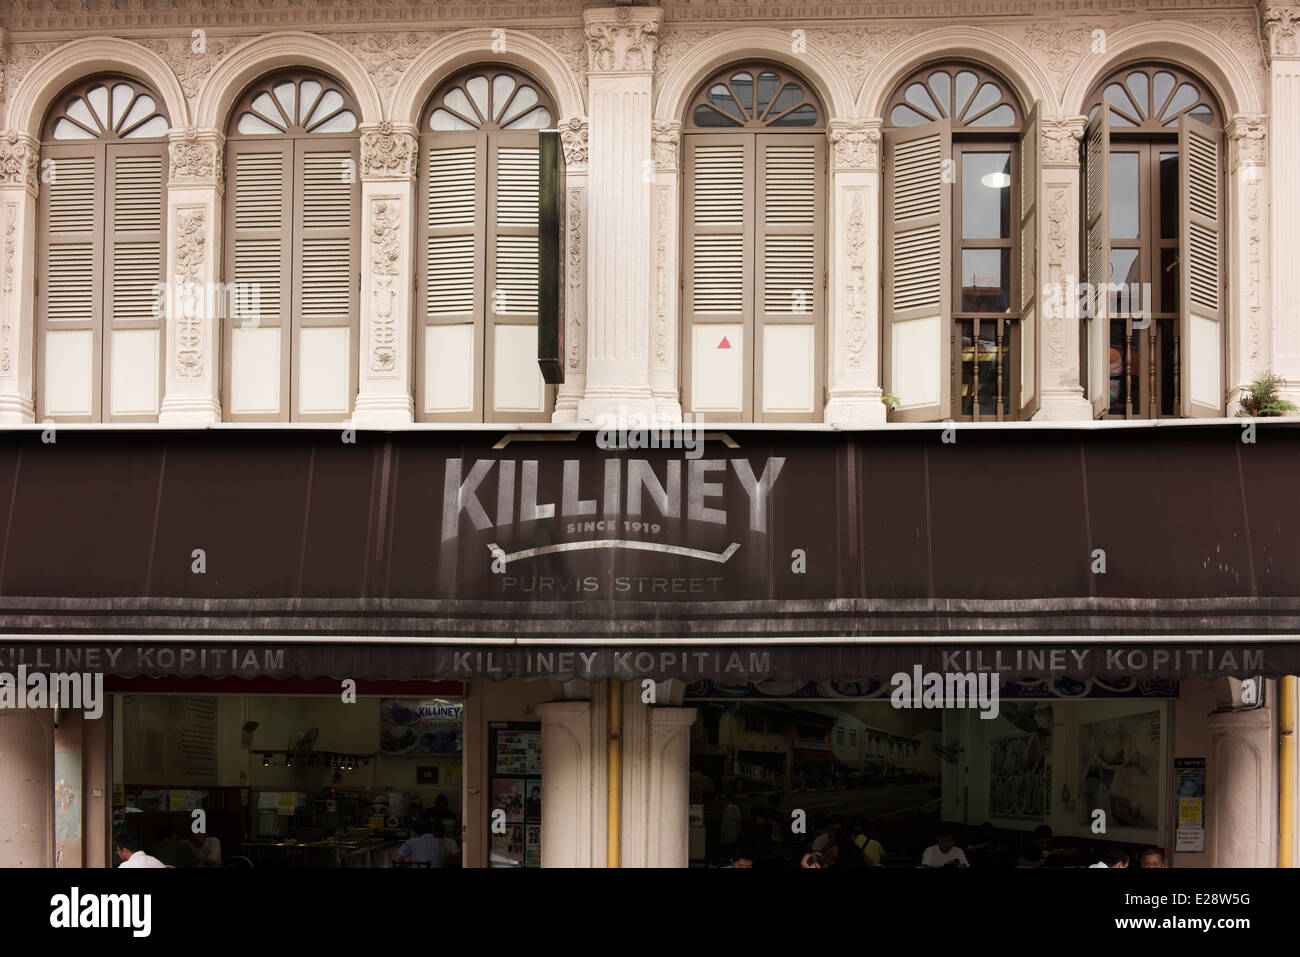 Facade of the Killiney Kopitiam restaurant which has been in operation since 1919. Stock Photo